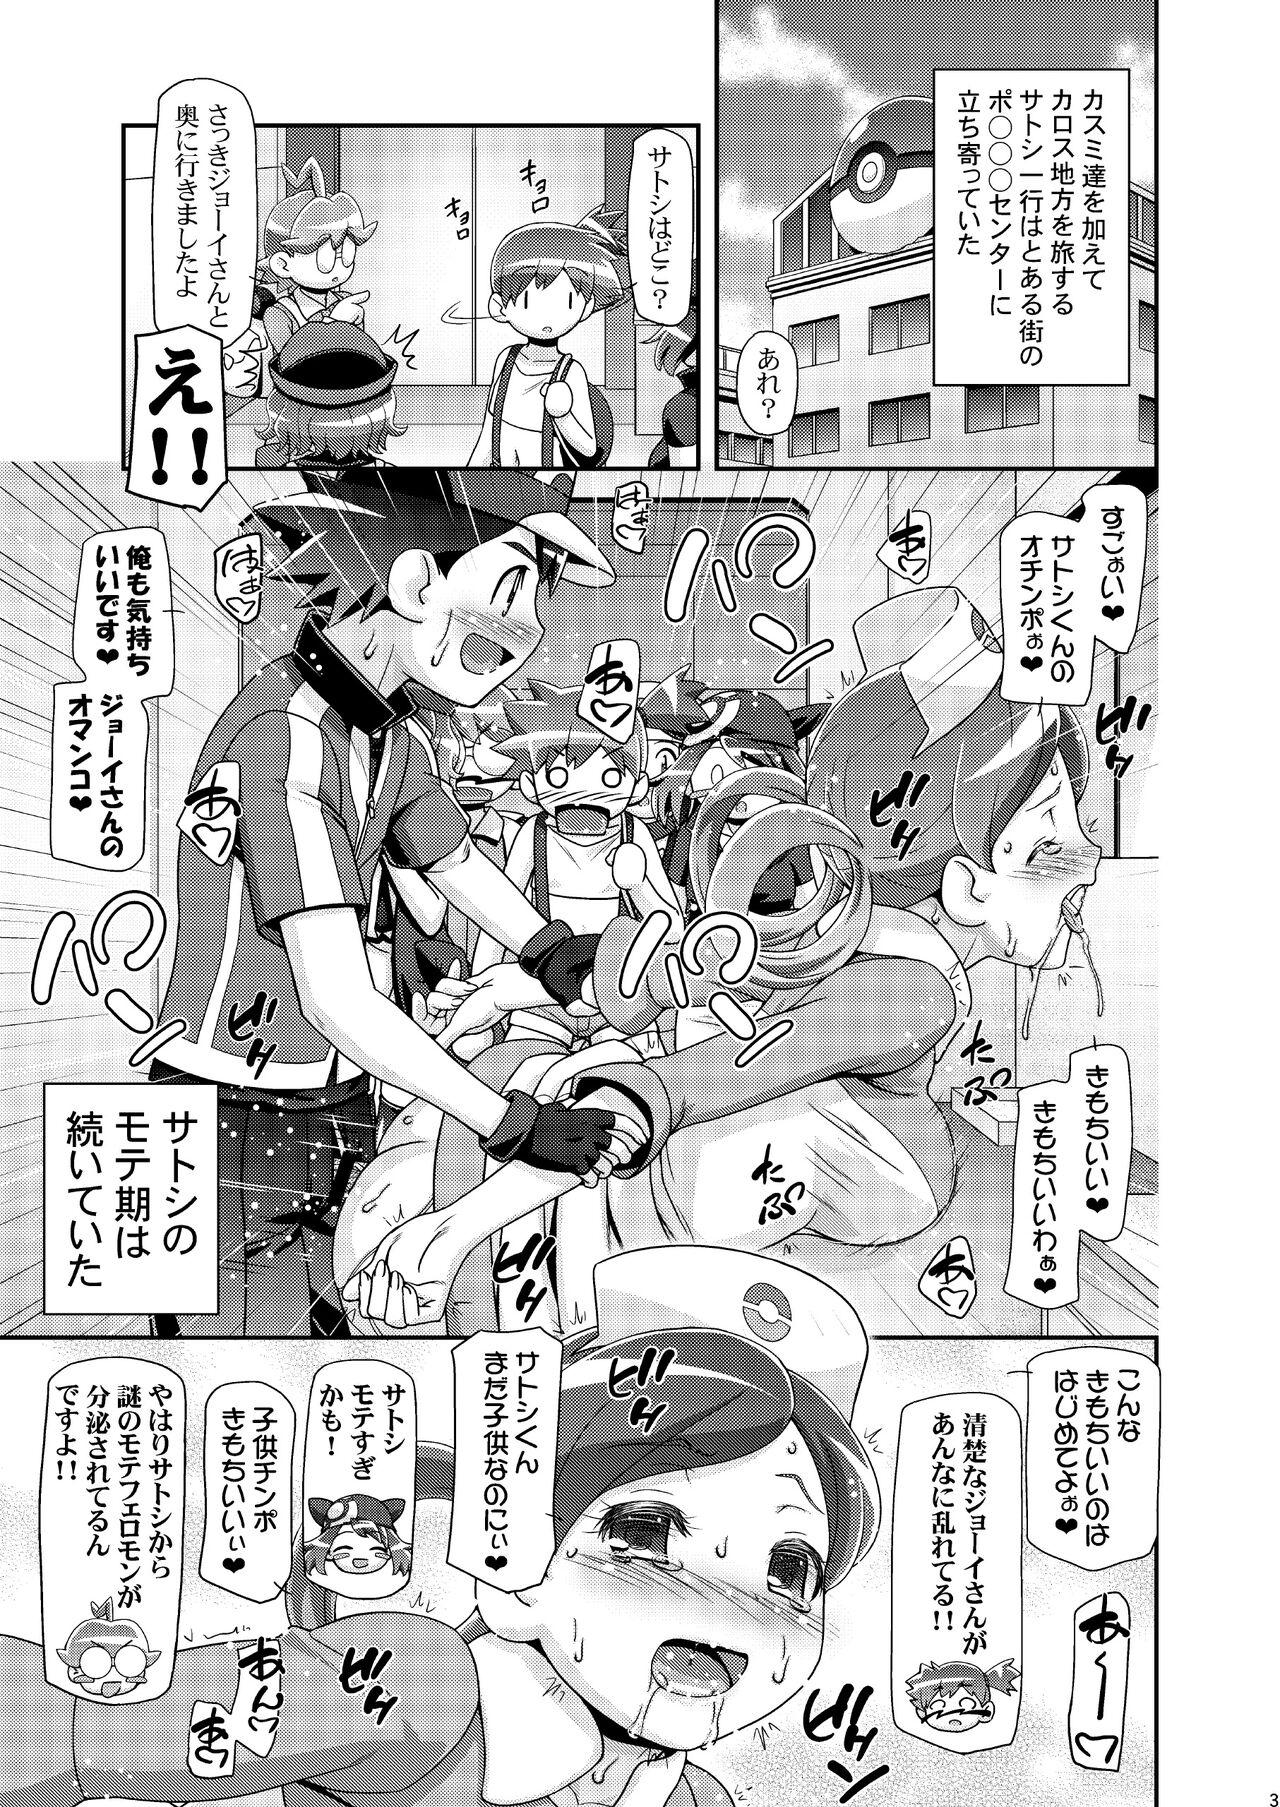 Hole PM GALS Iris no Turn!! - Pokemon | pocket monsters Les - Page 2